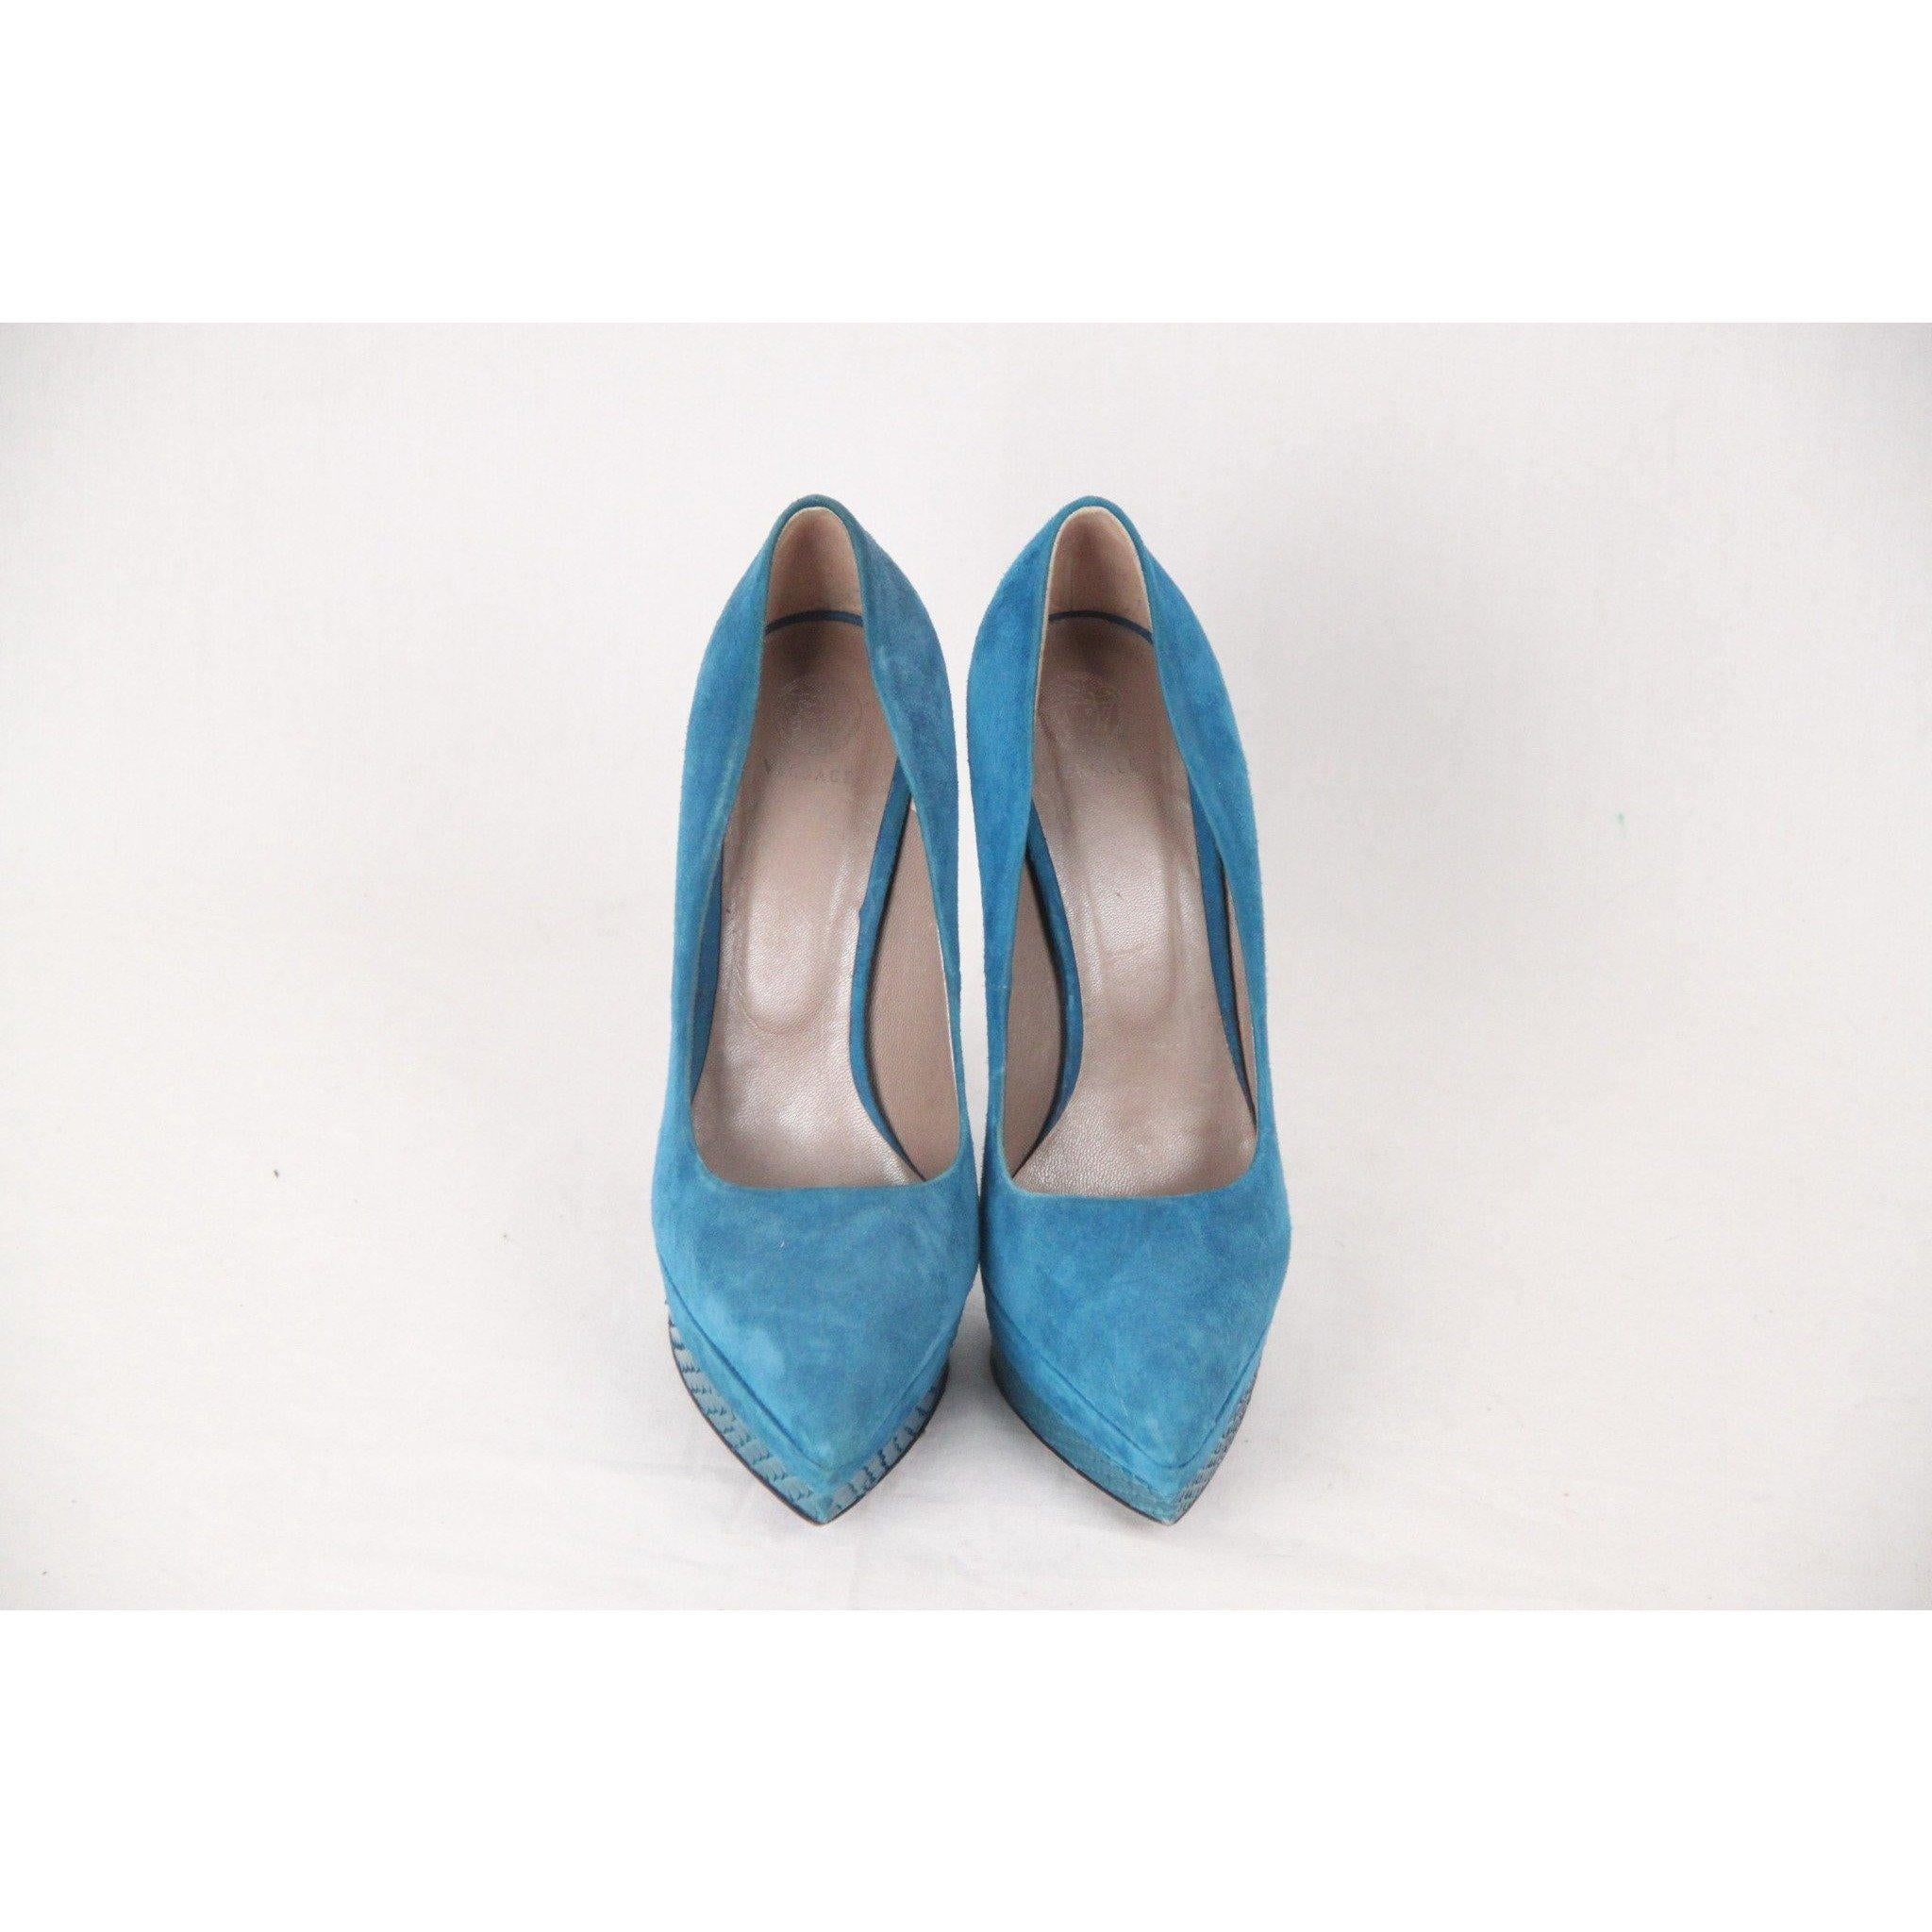 MATERIAL: Suede COLOR: Blue MODEL: Pumps GENDER: Women SIZE: 35 COUNTRY OF MANUFACTURE: Italy Condition CONDITION DETAILS: : B :GOOD CONDITION - Some light wear of use. Condition details: Some wear and light darkness on suede due to normal use, some